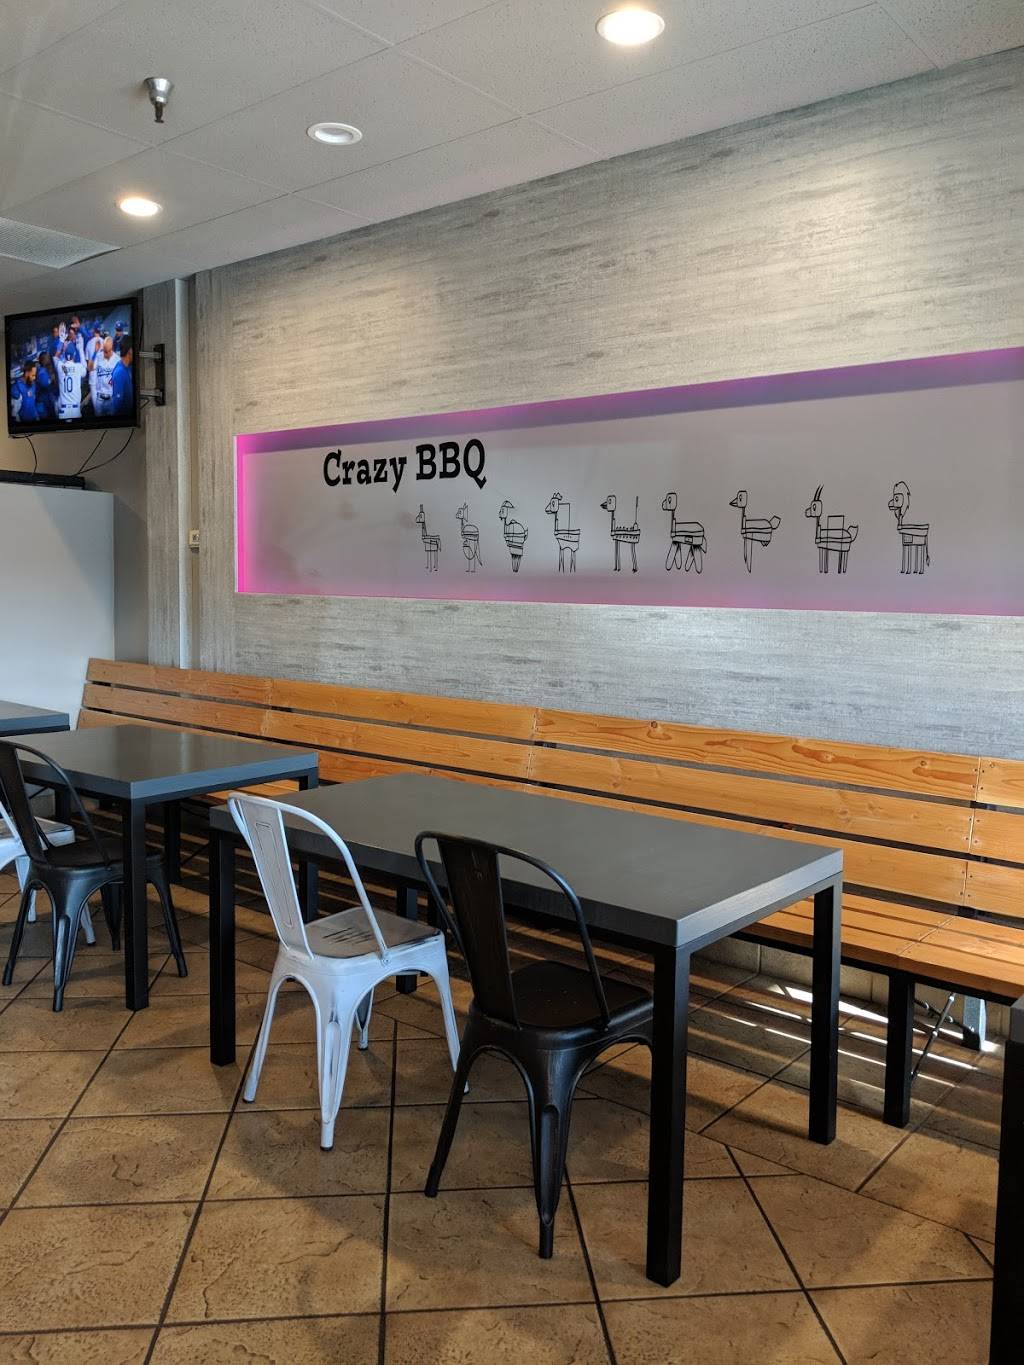 Crazy BBQ | 2651 Oswell St, Bakersfield, CA 93306 | Phone: (661) 873-7777